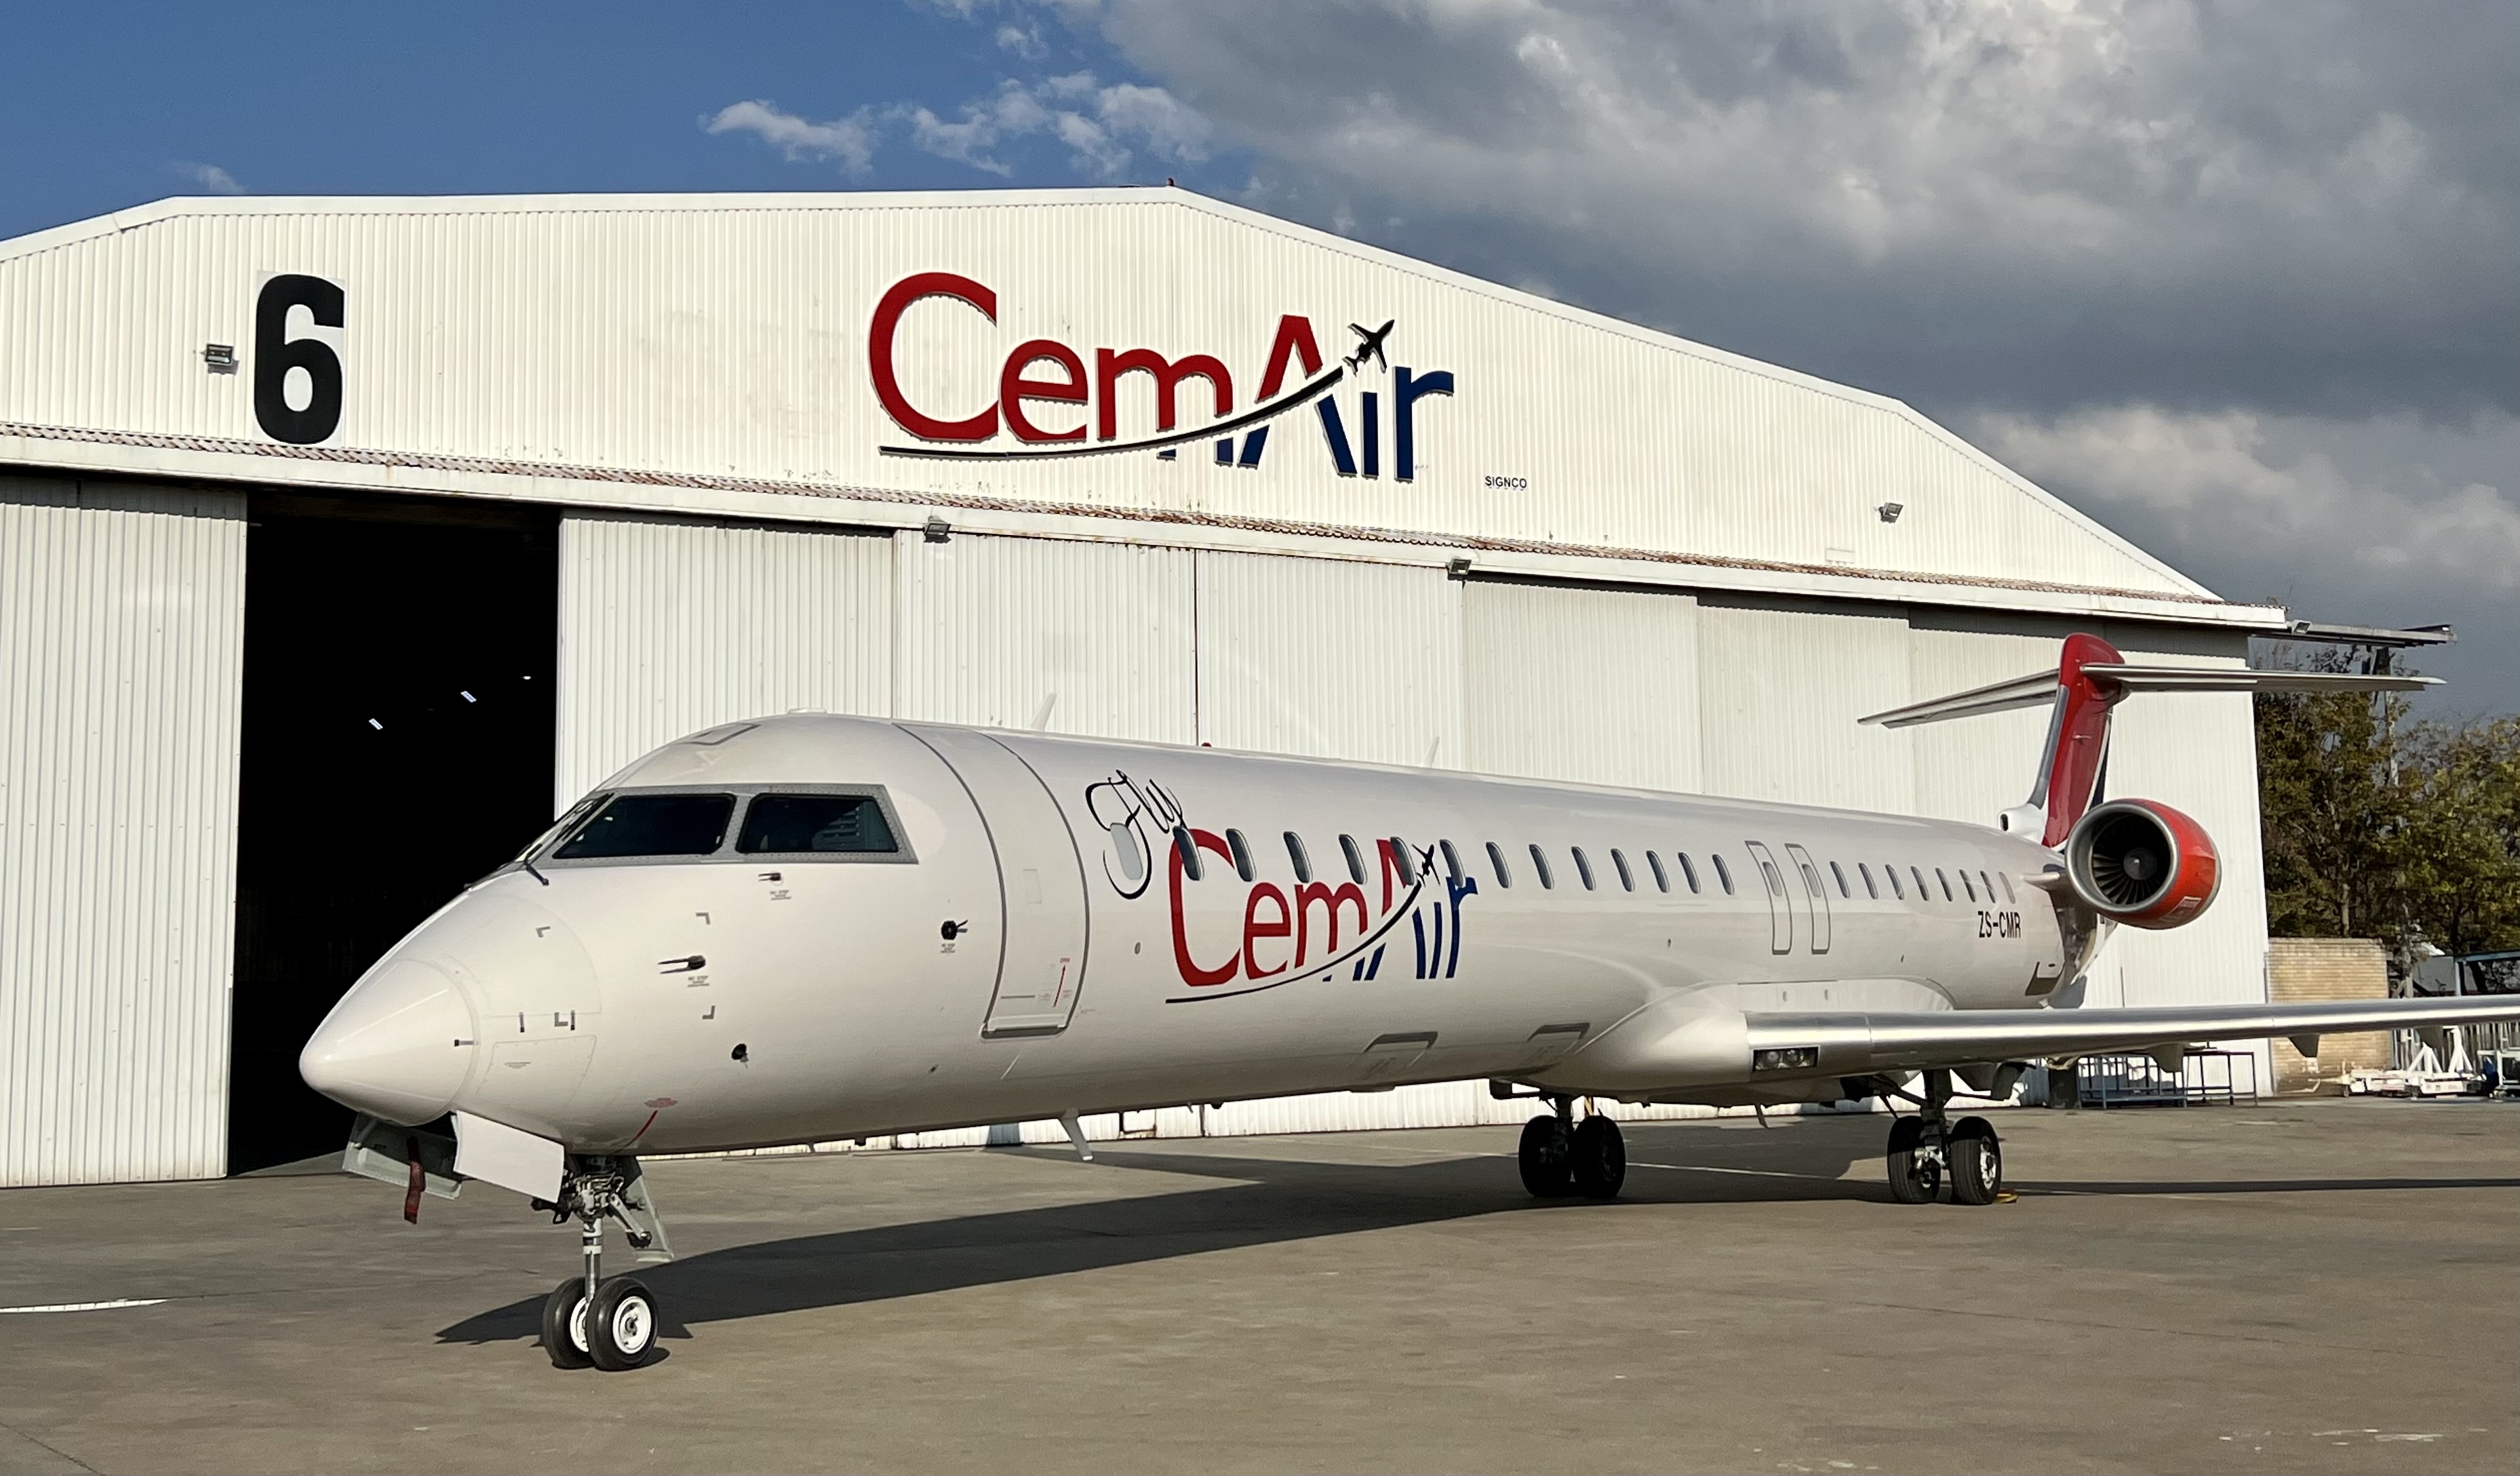 CemAir leases two CRJ900s from TrueNoord